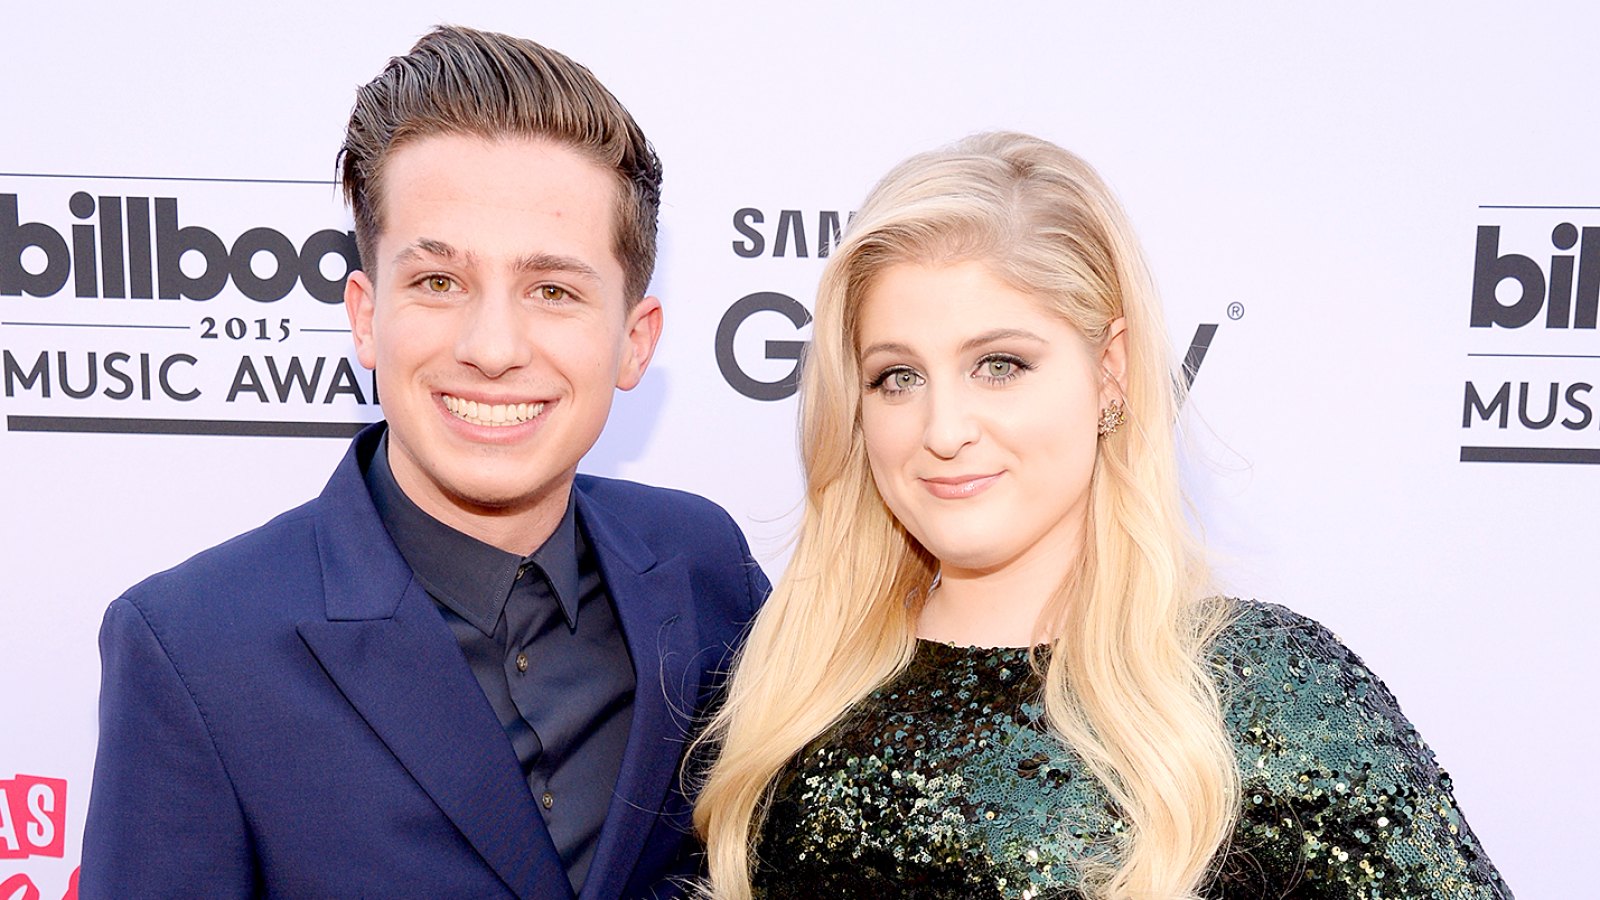 Charlie Puth and Meghan Trainor attend the 2015 Billboard Music Awards.